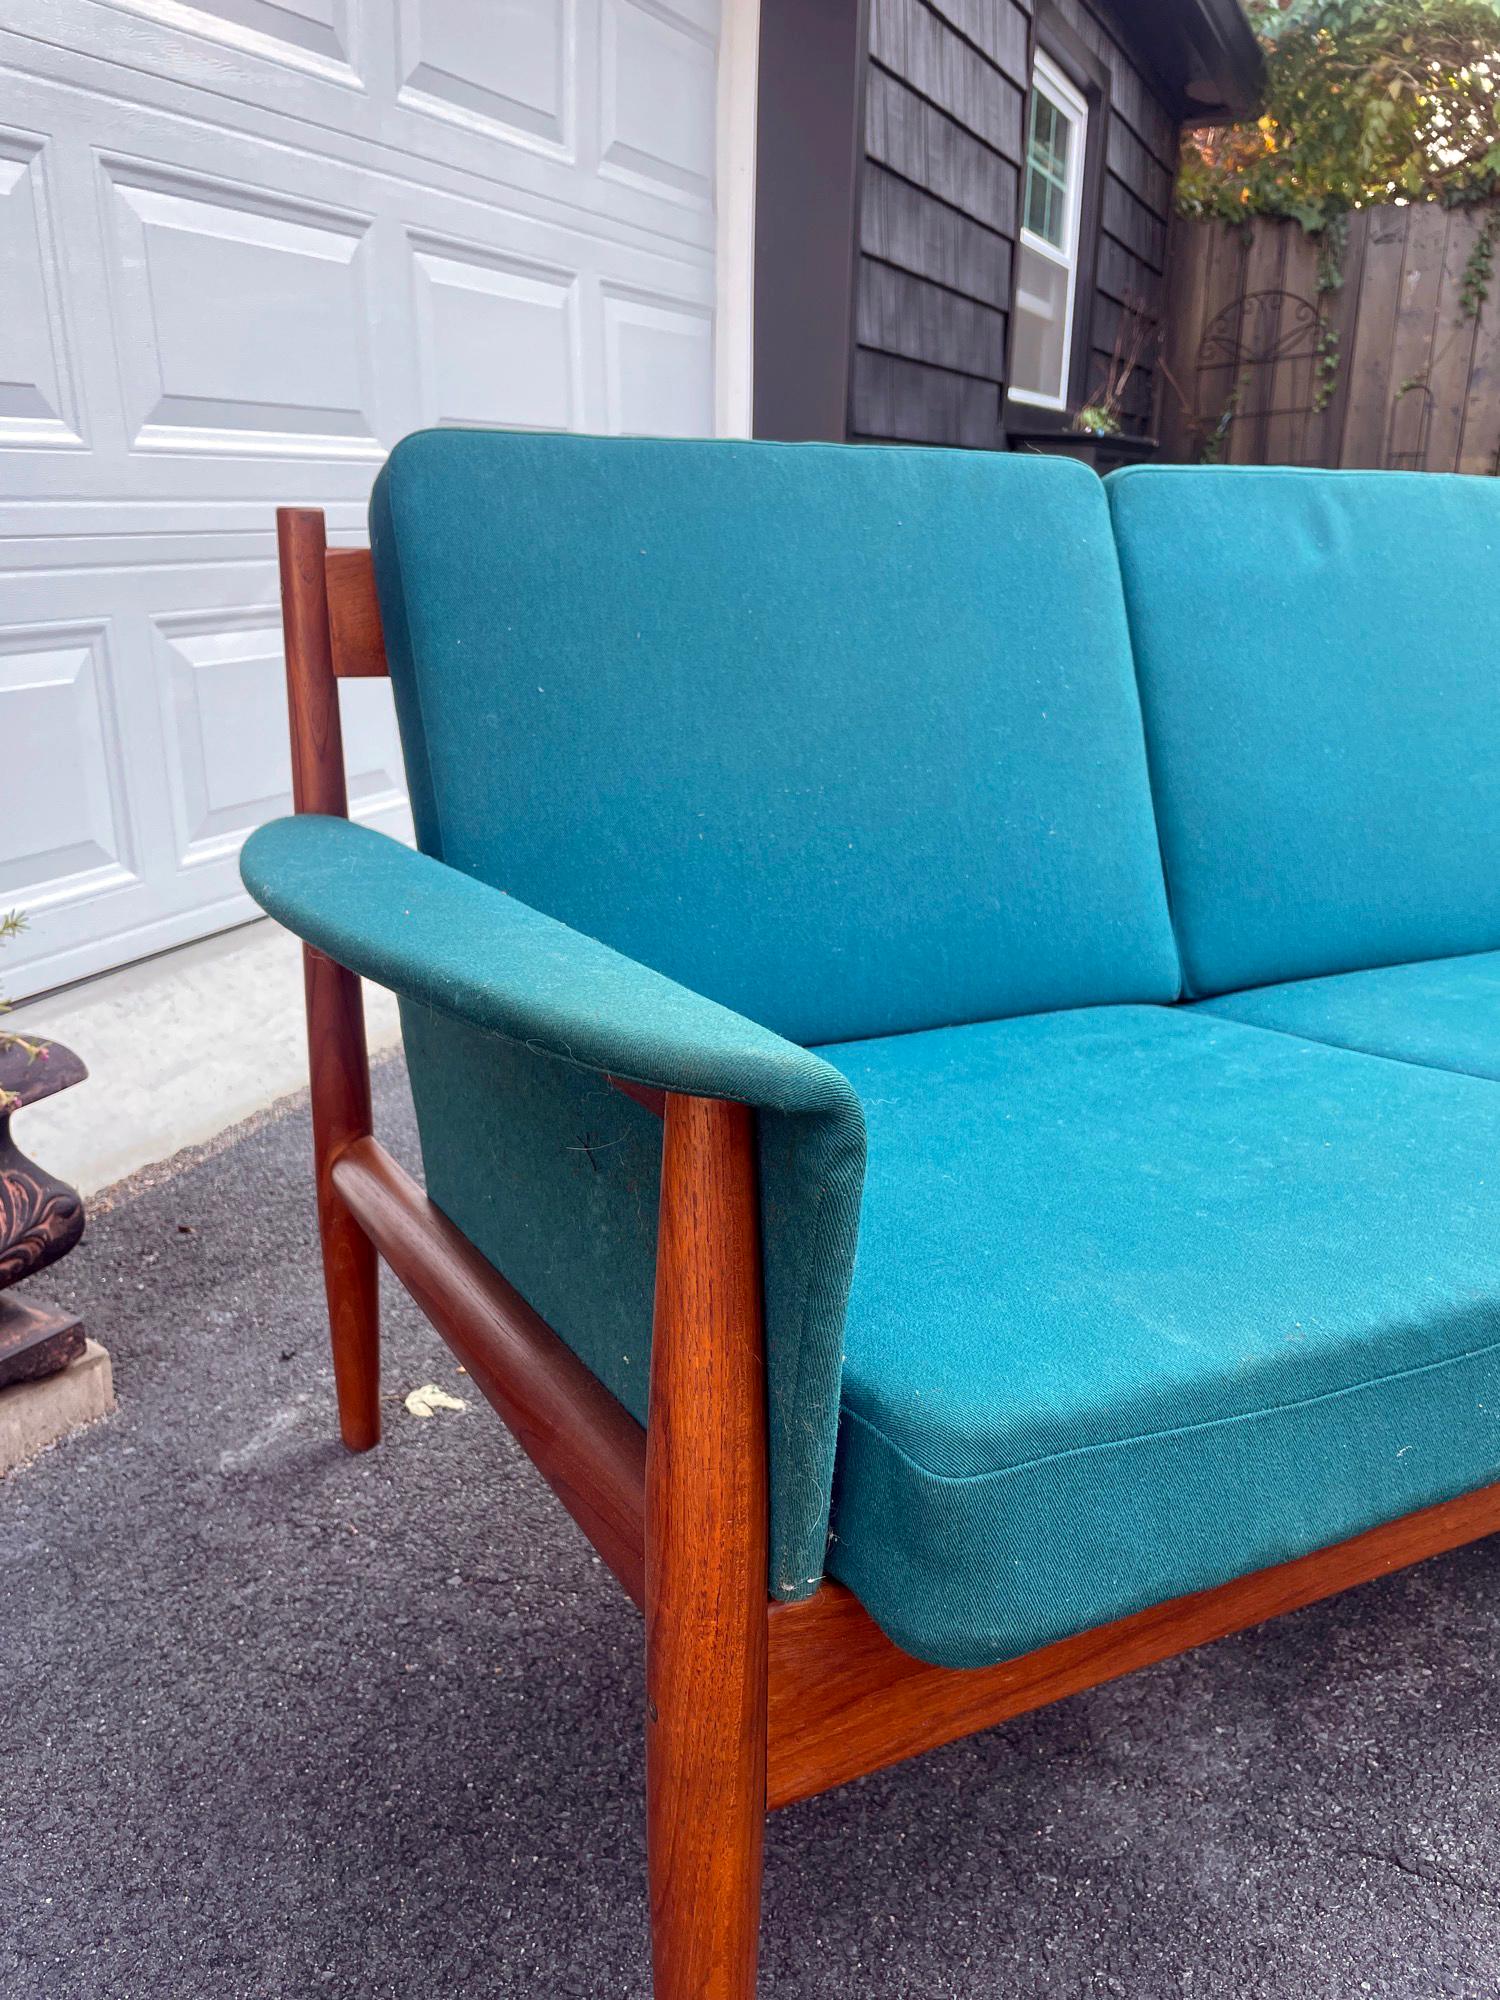 A stunning four seat teal textile upholstered sofa designed by Grete Jalk for France and Sons of Denmark. Frame is made of teak. The cushions are spring loaded. Original France and Sons badge is intact on the frame. In excellent condition with